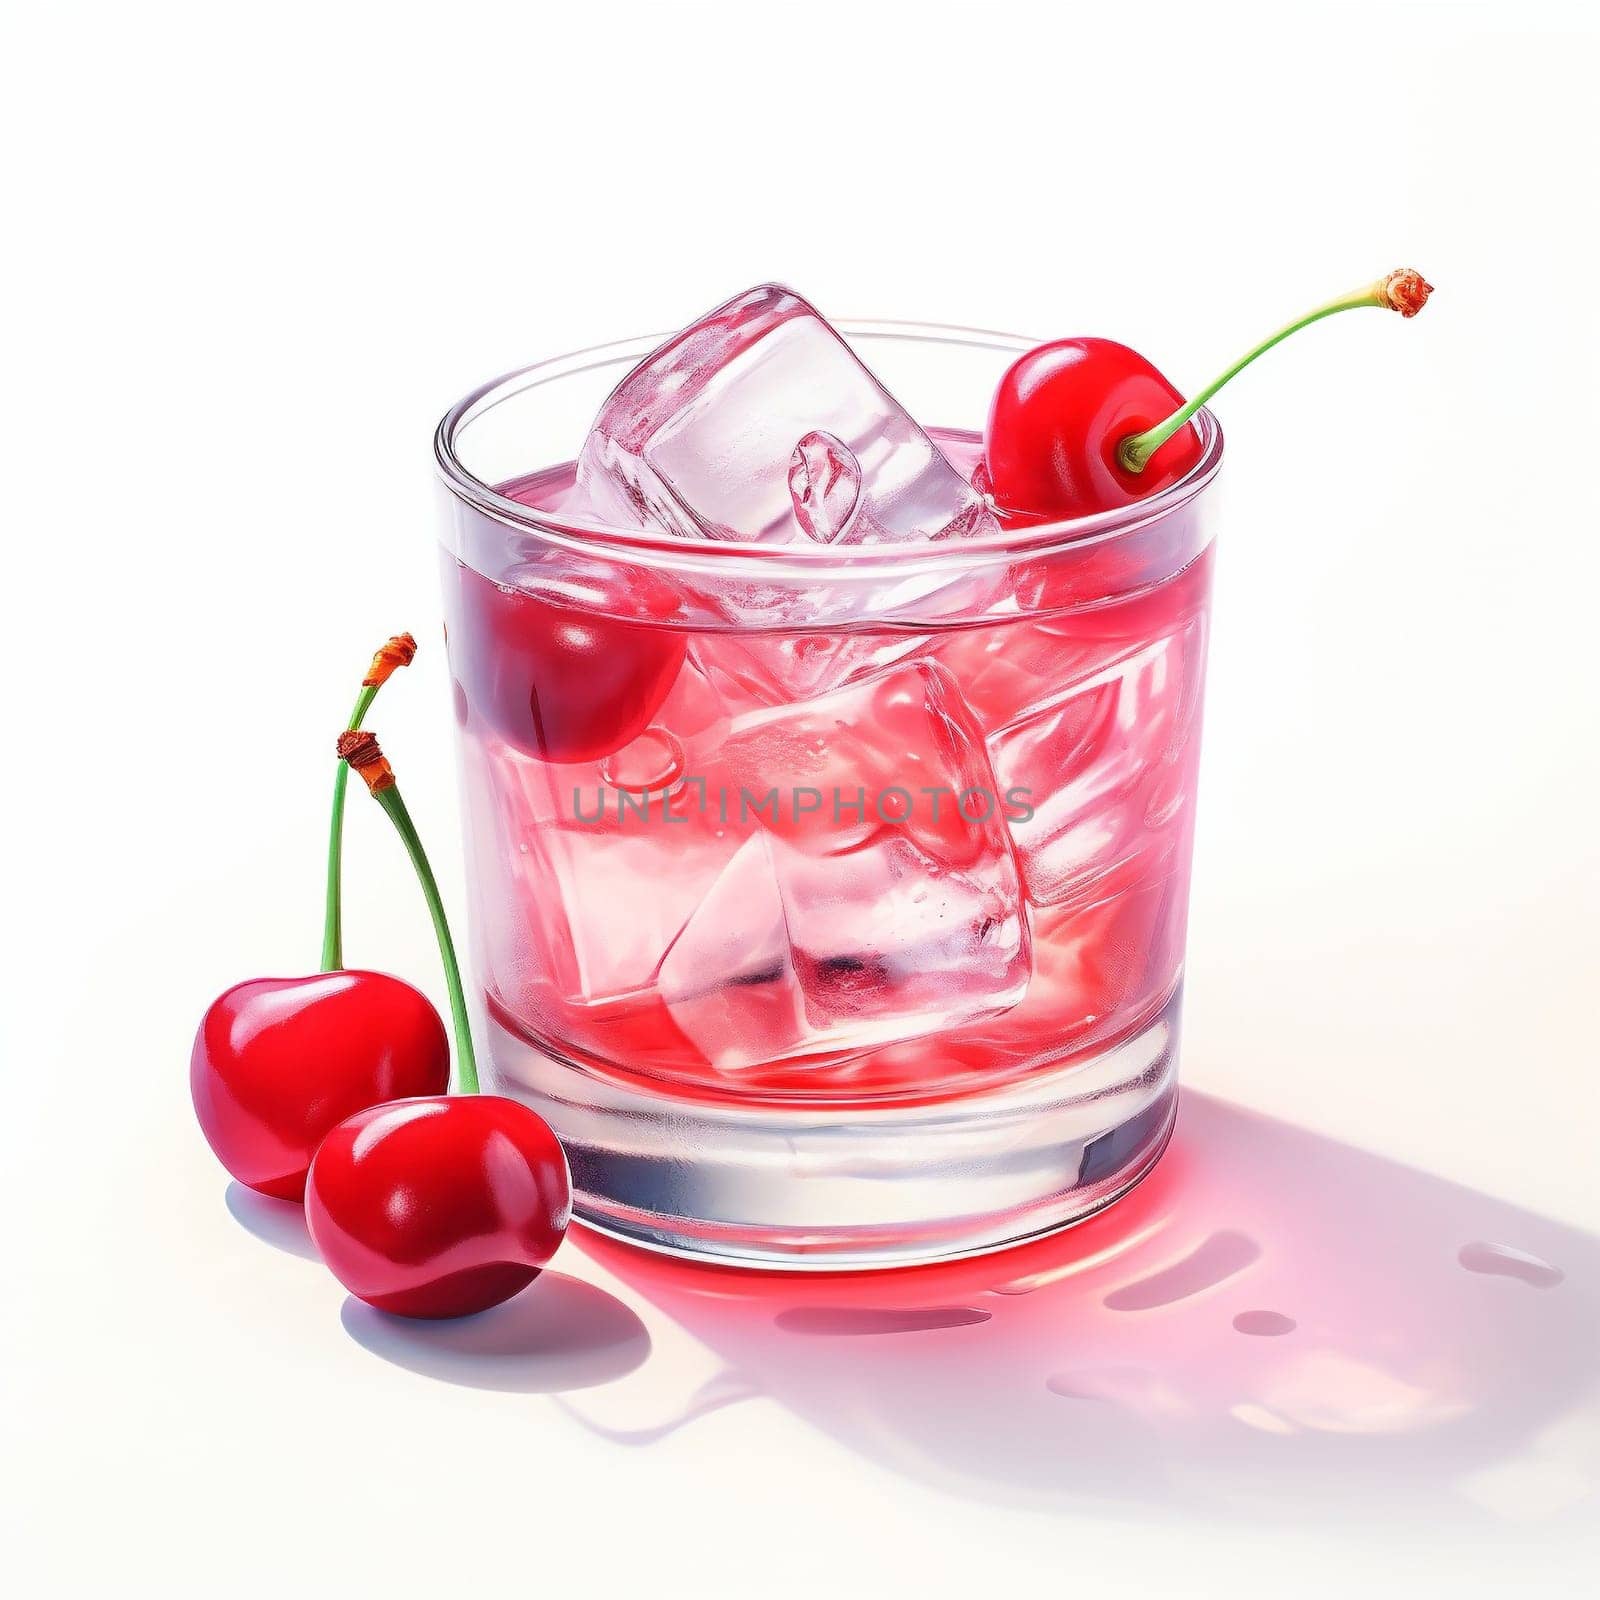 Cocktail Day with Cherry and Ice. by Rina_Dozornaya